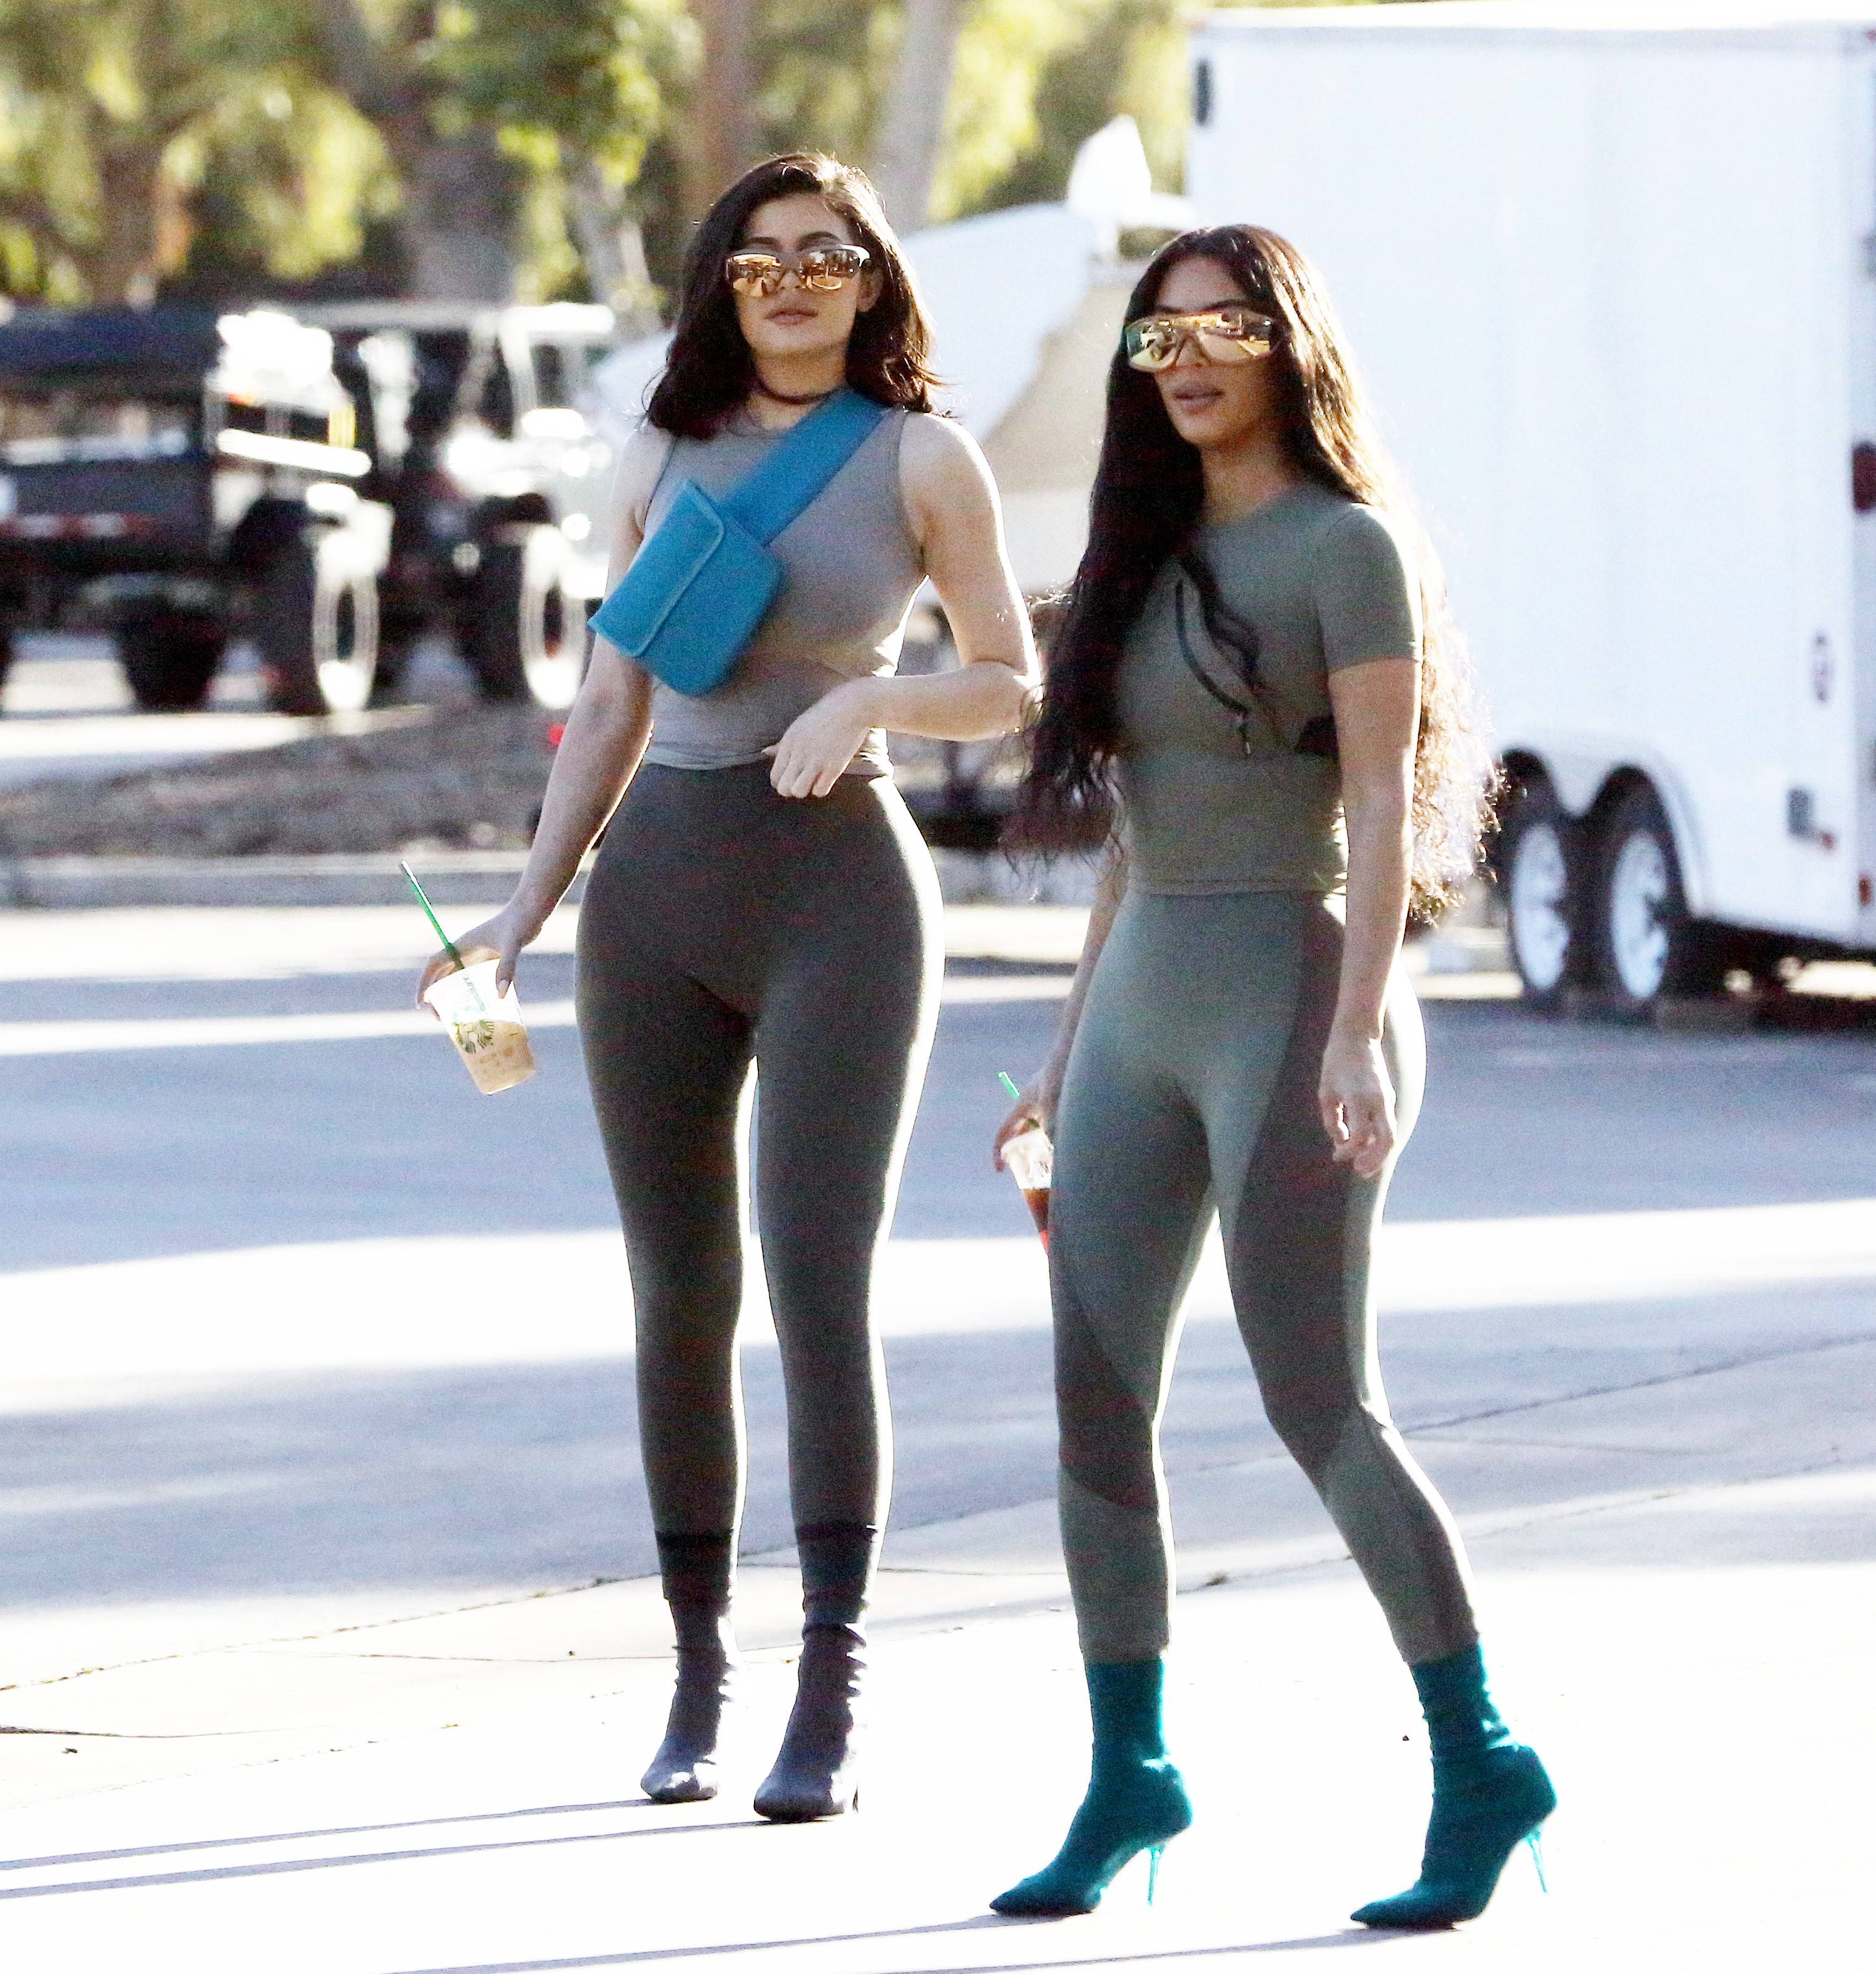 Kylie Jenner shows off curves in skintight black leggings and